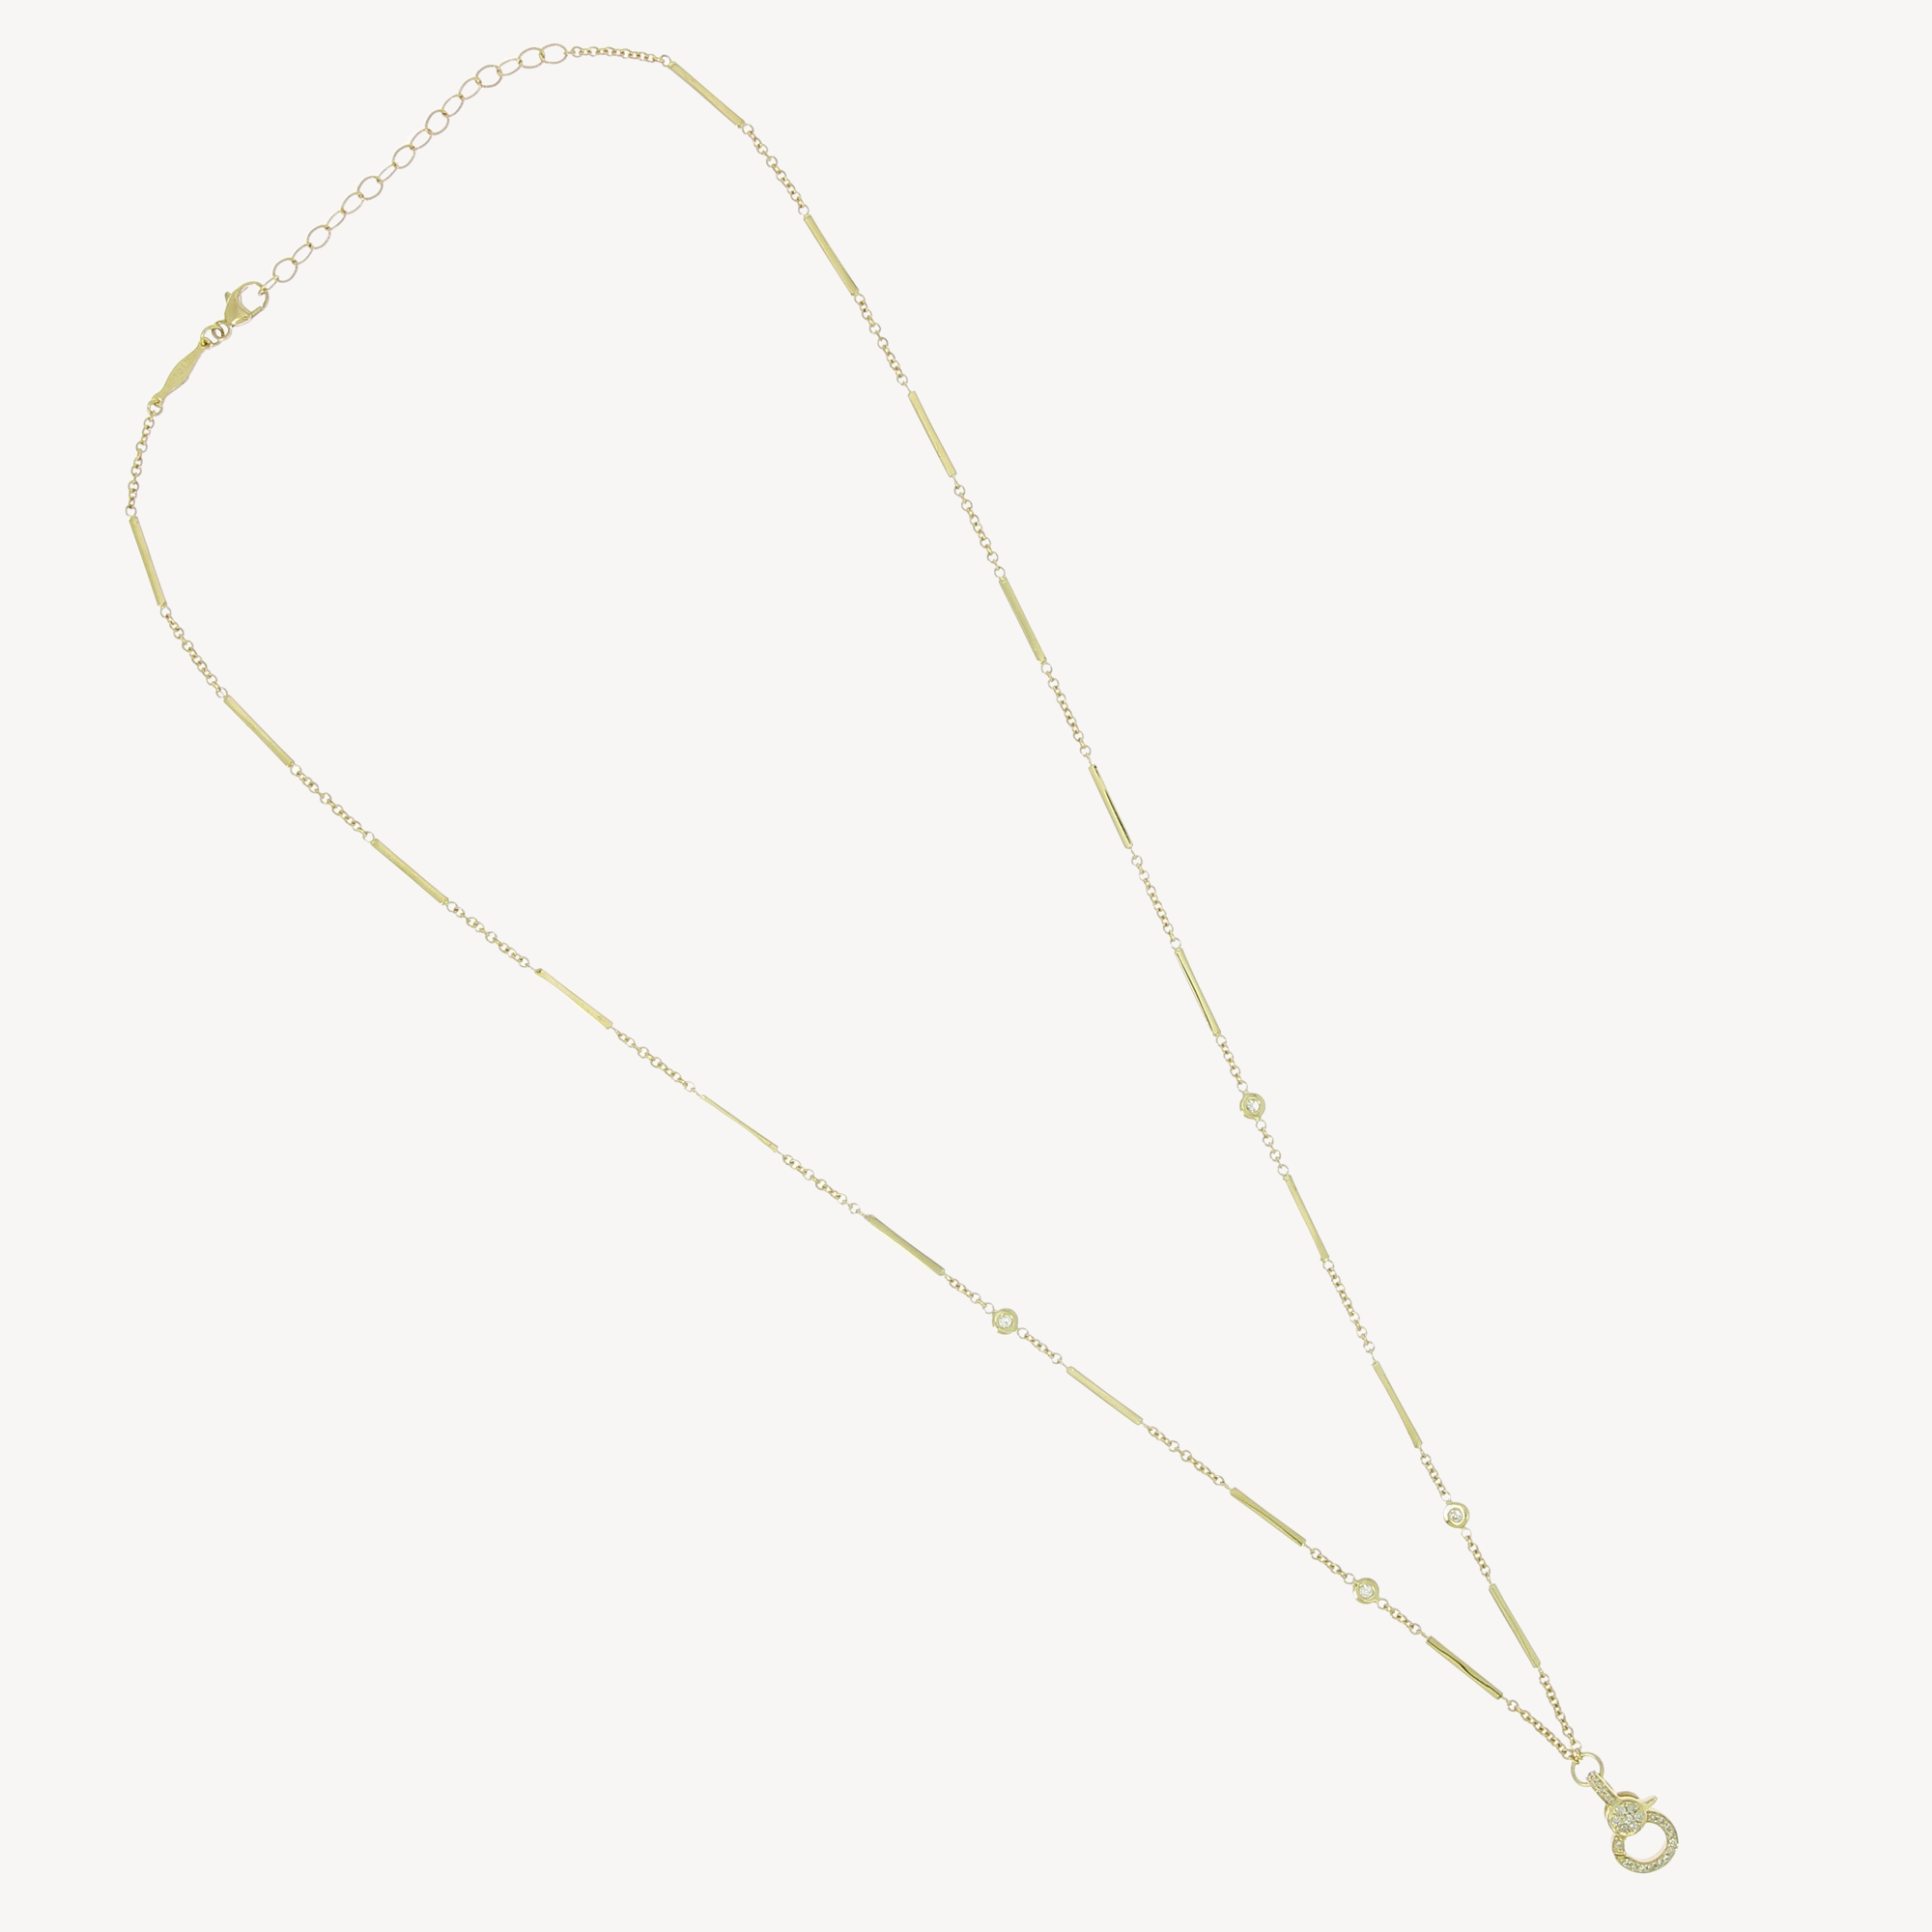 Yellow Gold Necklace with Paved Diamond Charms